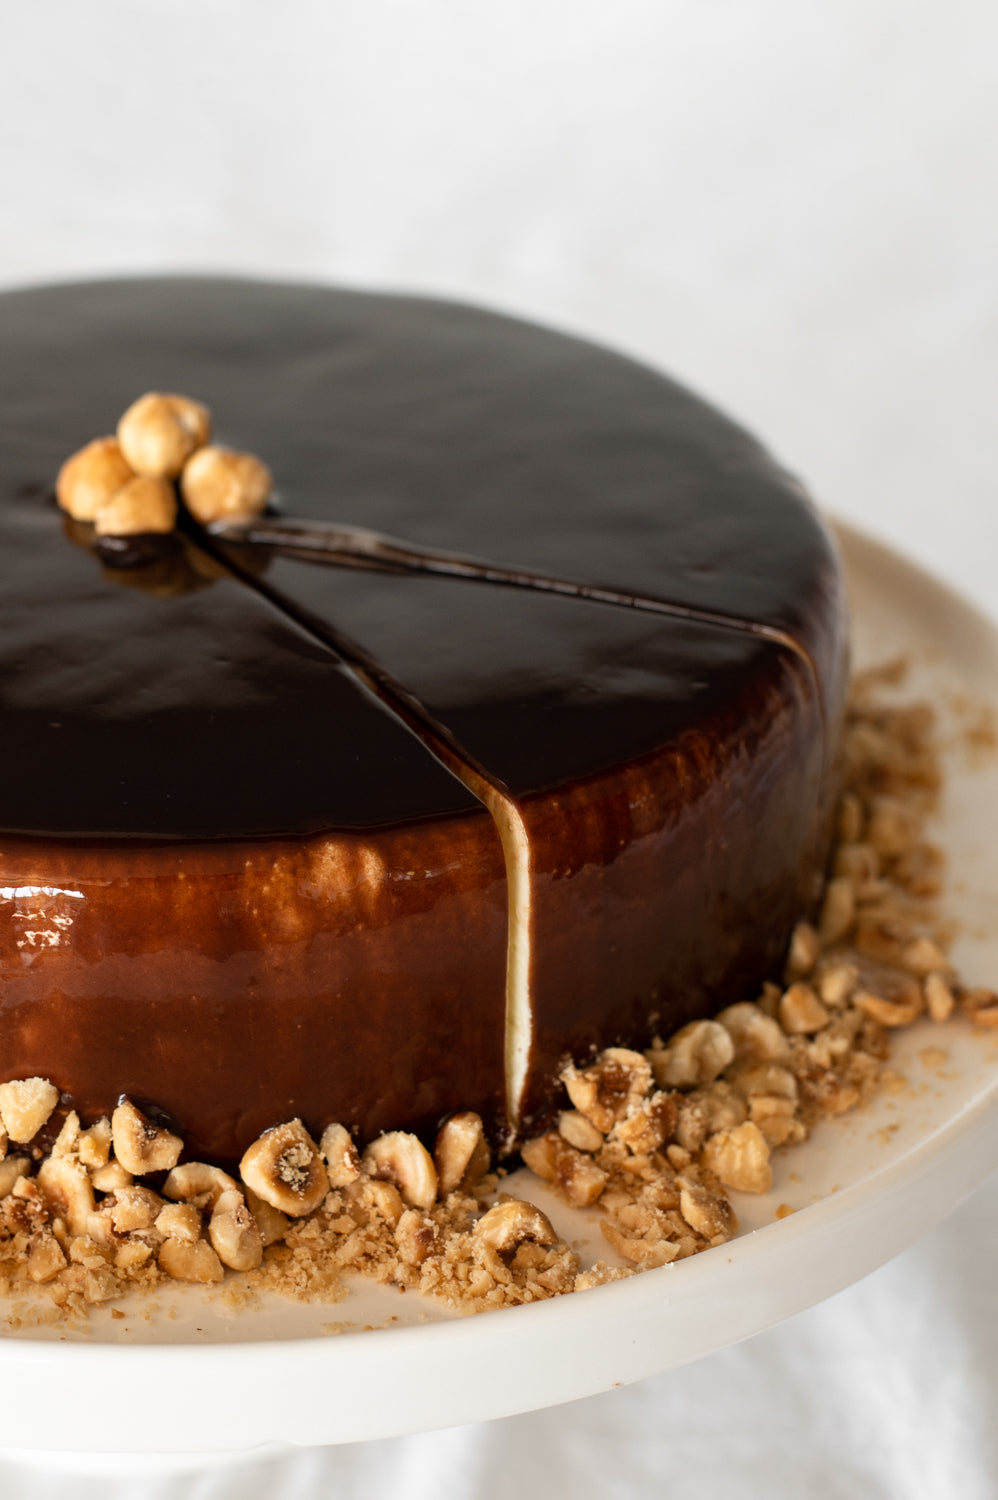 A close up of a chocolate hazelnut mousse cake that is garnished with hazelnuts